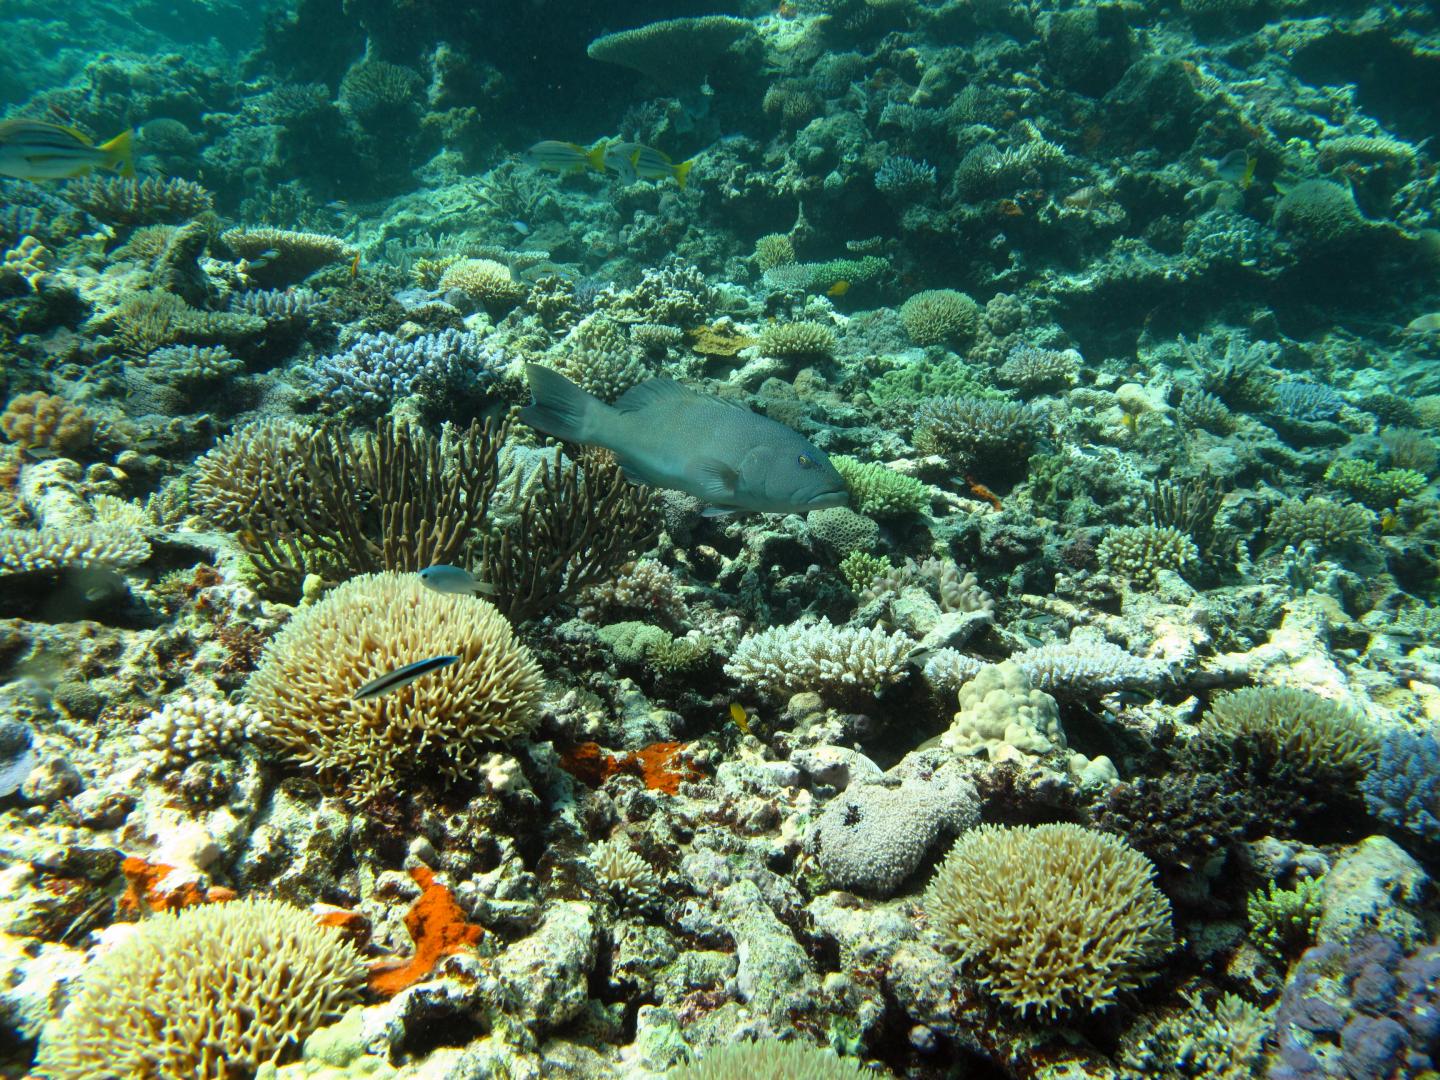 Coral Trout on the Reef